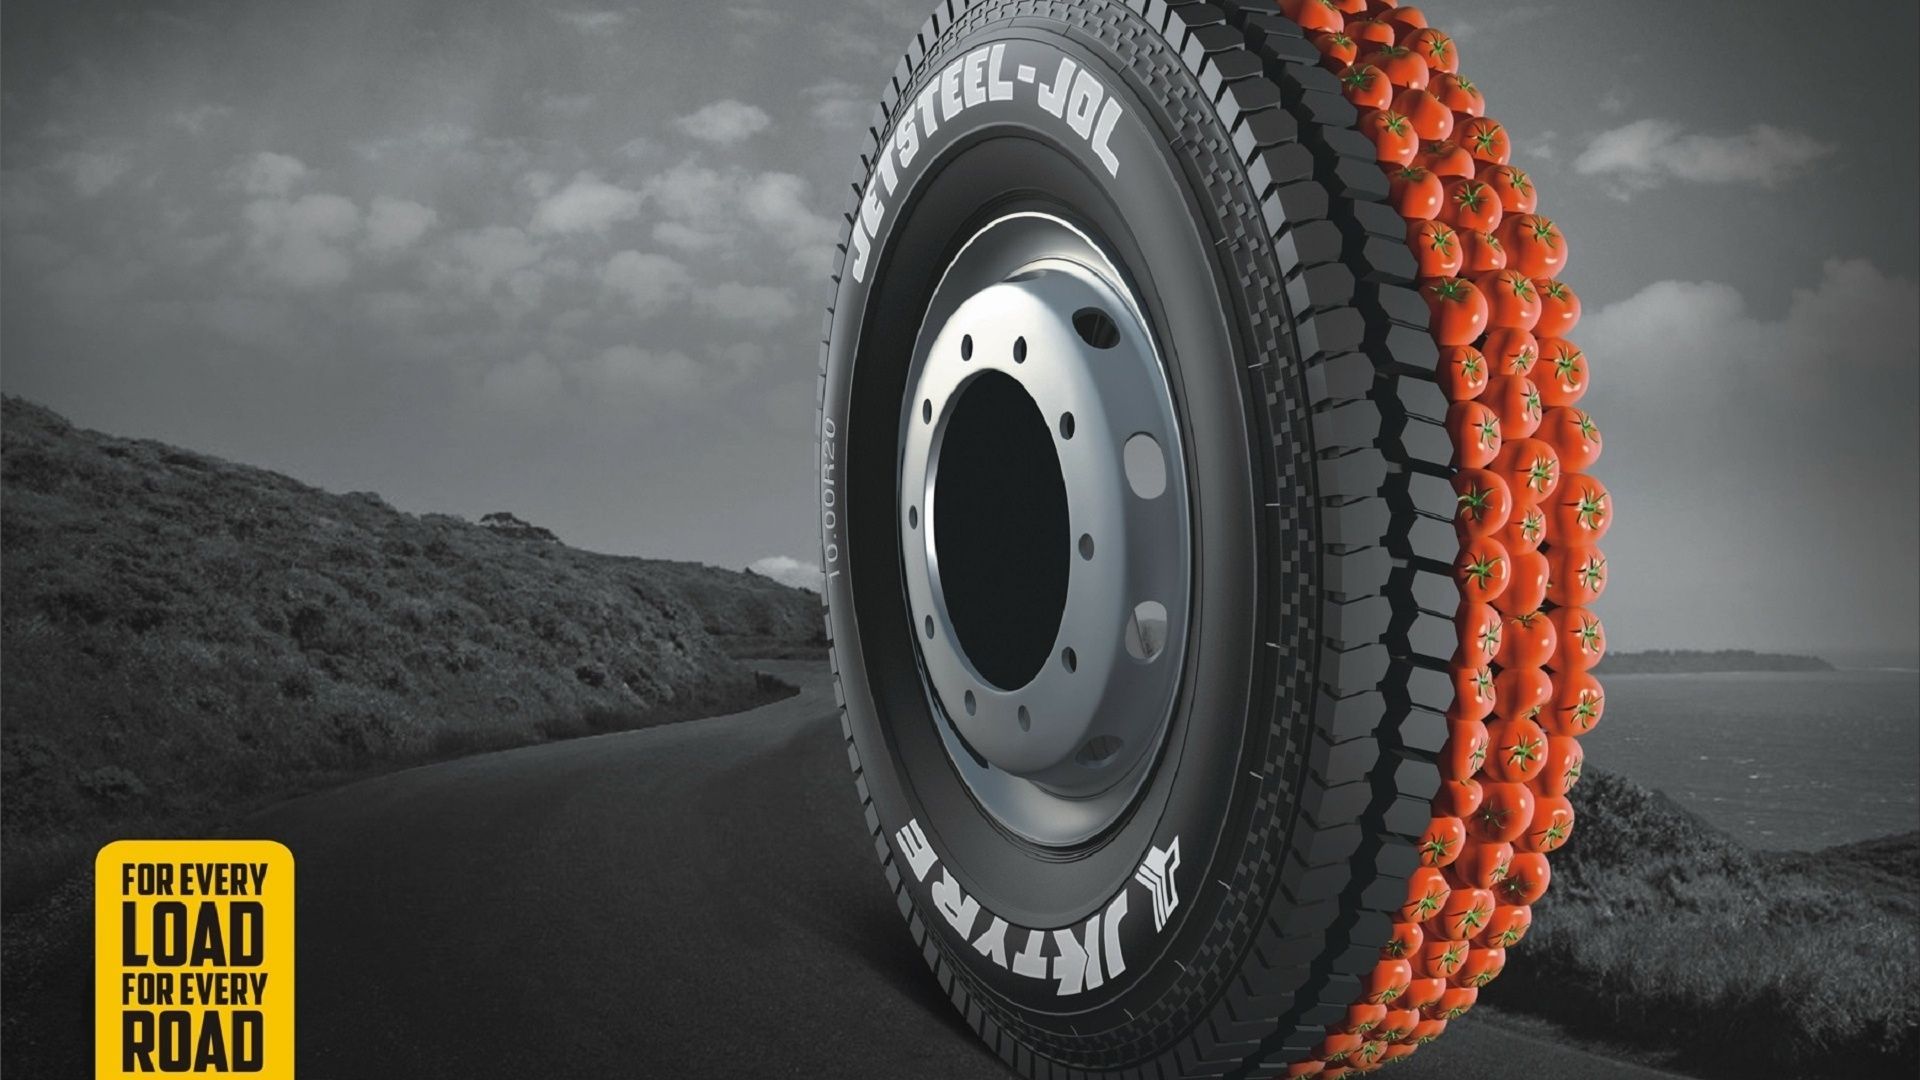 Tyres, Tomattos, Jk Tyres Wallpaper and Picture. Creative advertising campaign, Creative advertising, Advertising campaign poster